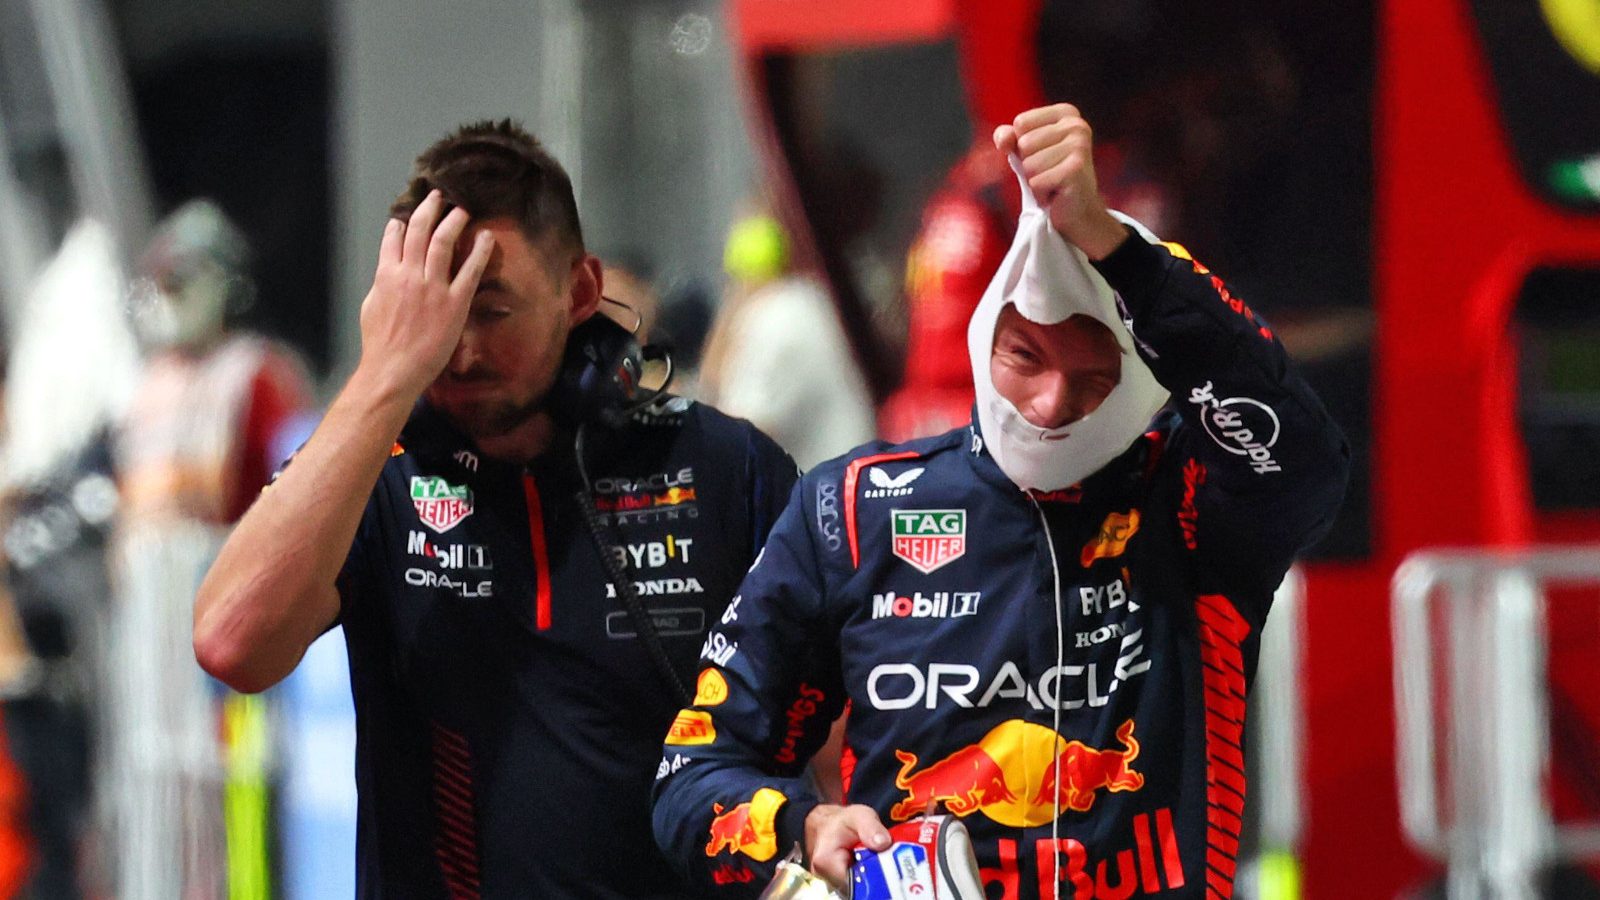 Max Verstappen pulls off his fireproofs after exiting qualifying in Singapore.